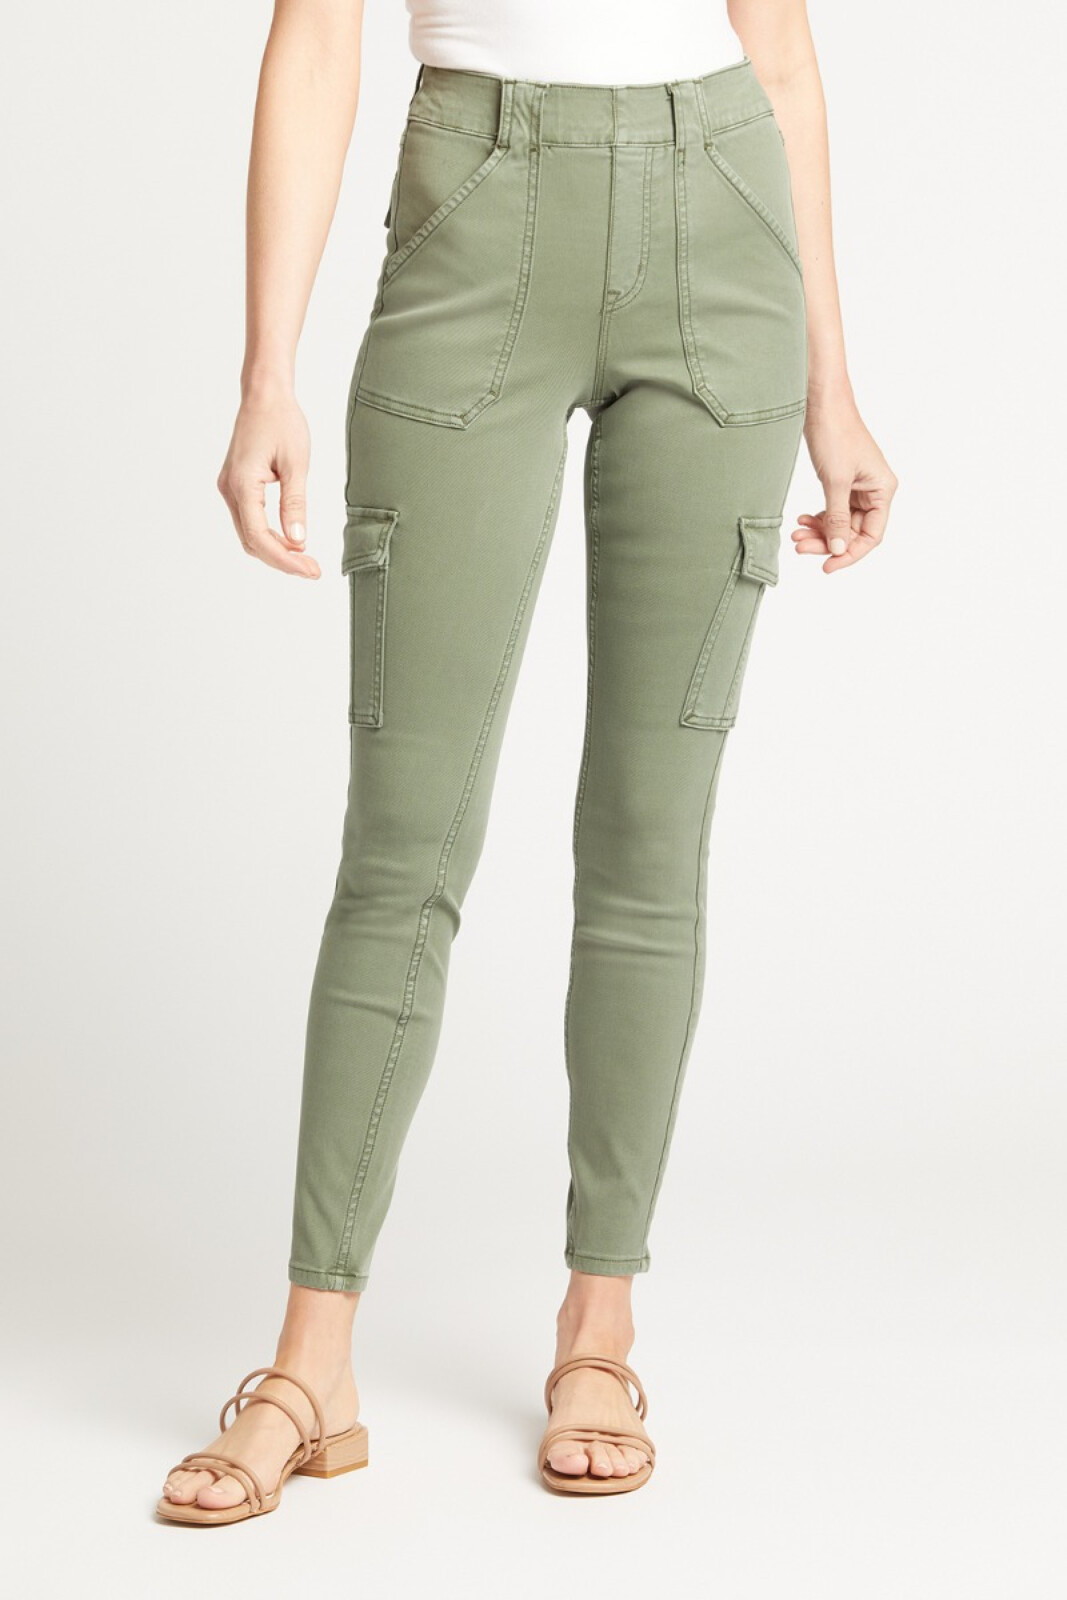 Spanx 20311R Stretch Twill Olive Green Ankle Cargo Pants Size Small - $79  New With Tags - From Lauren